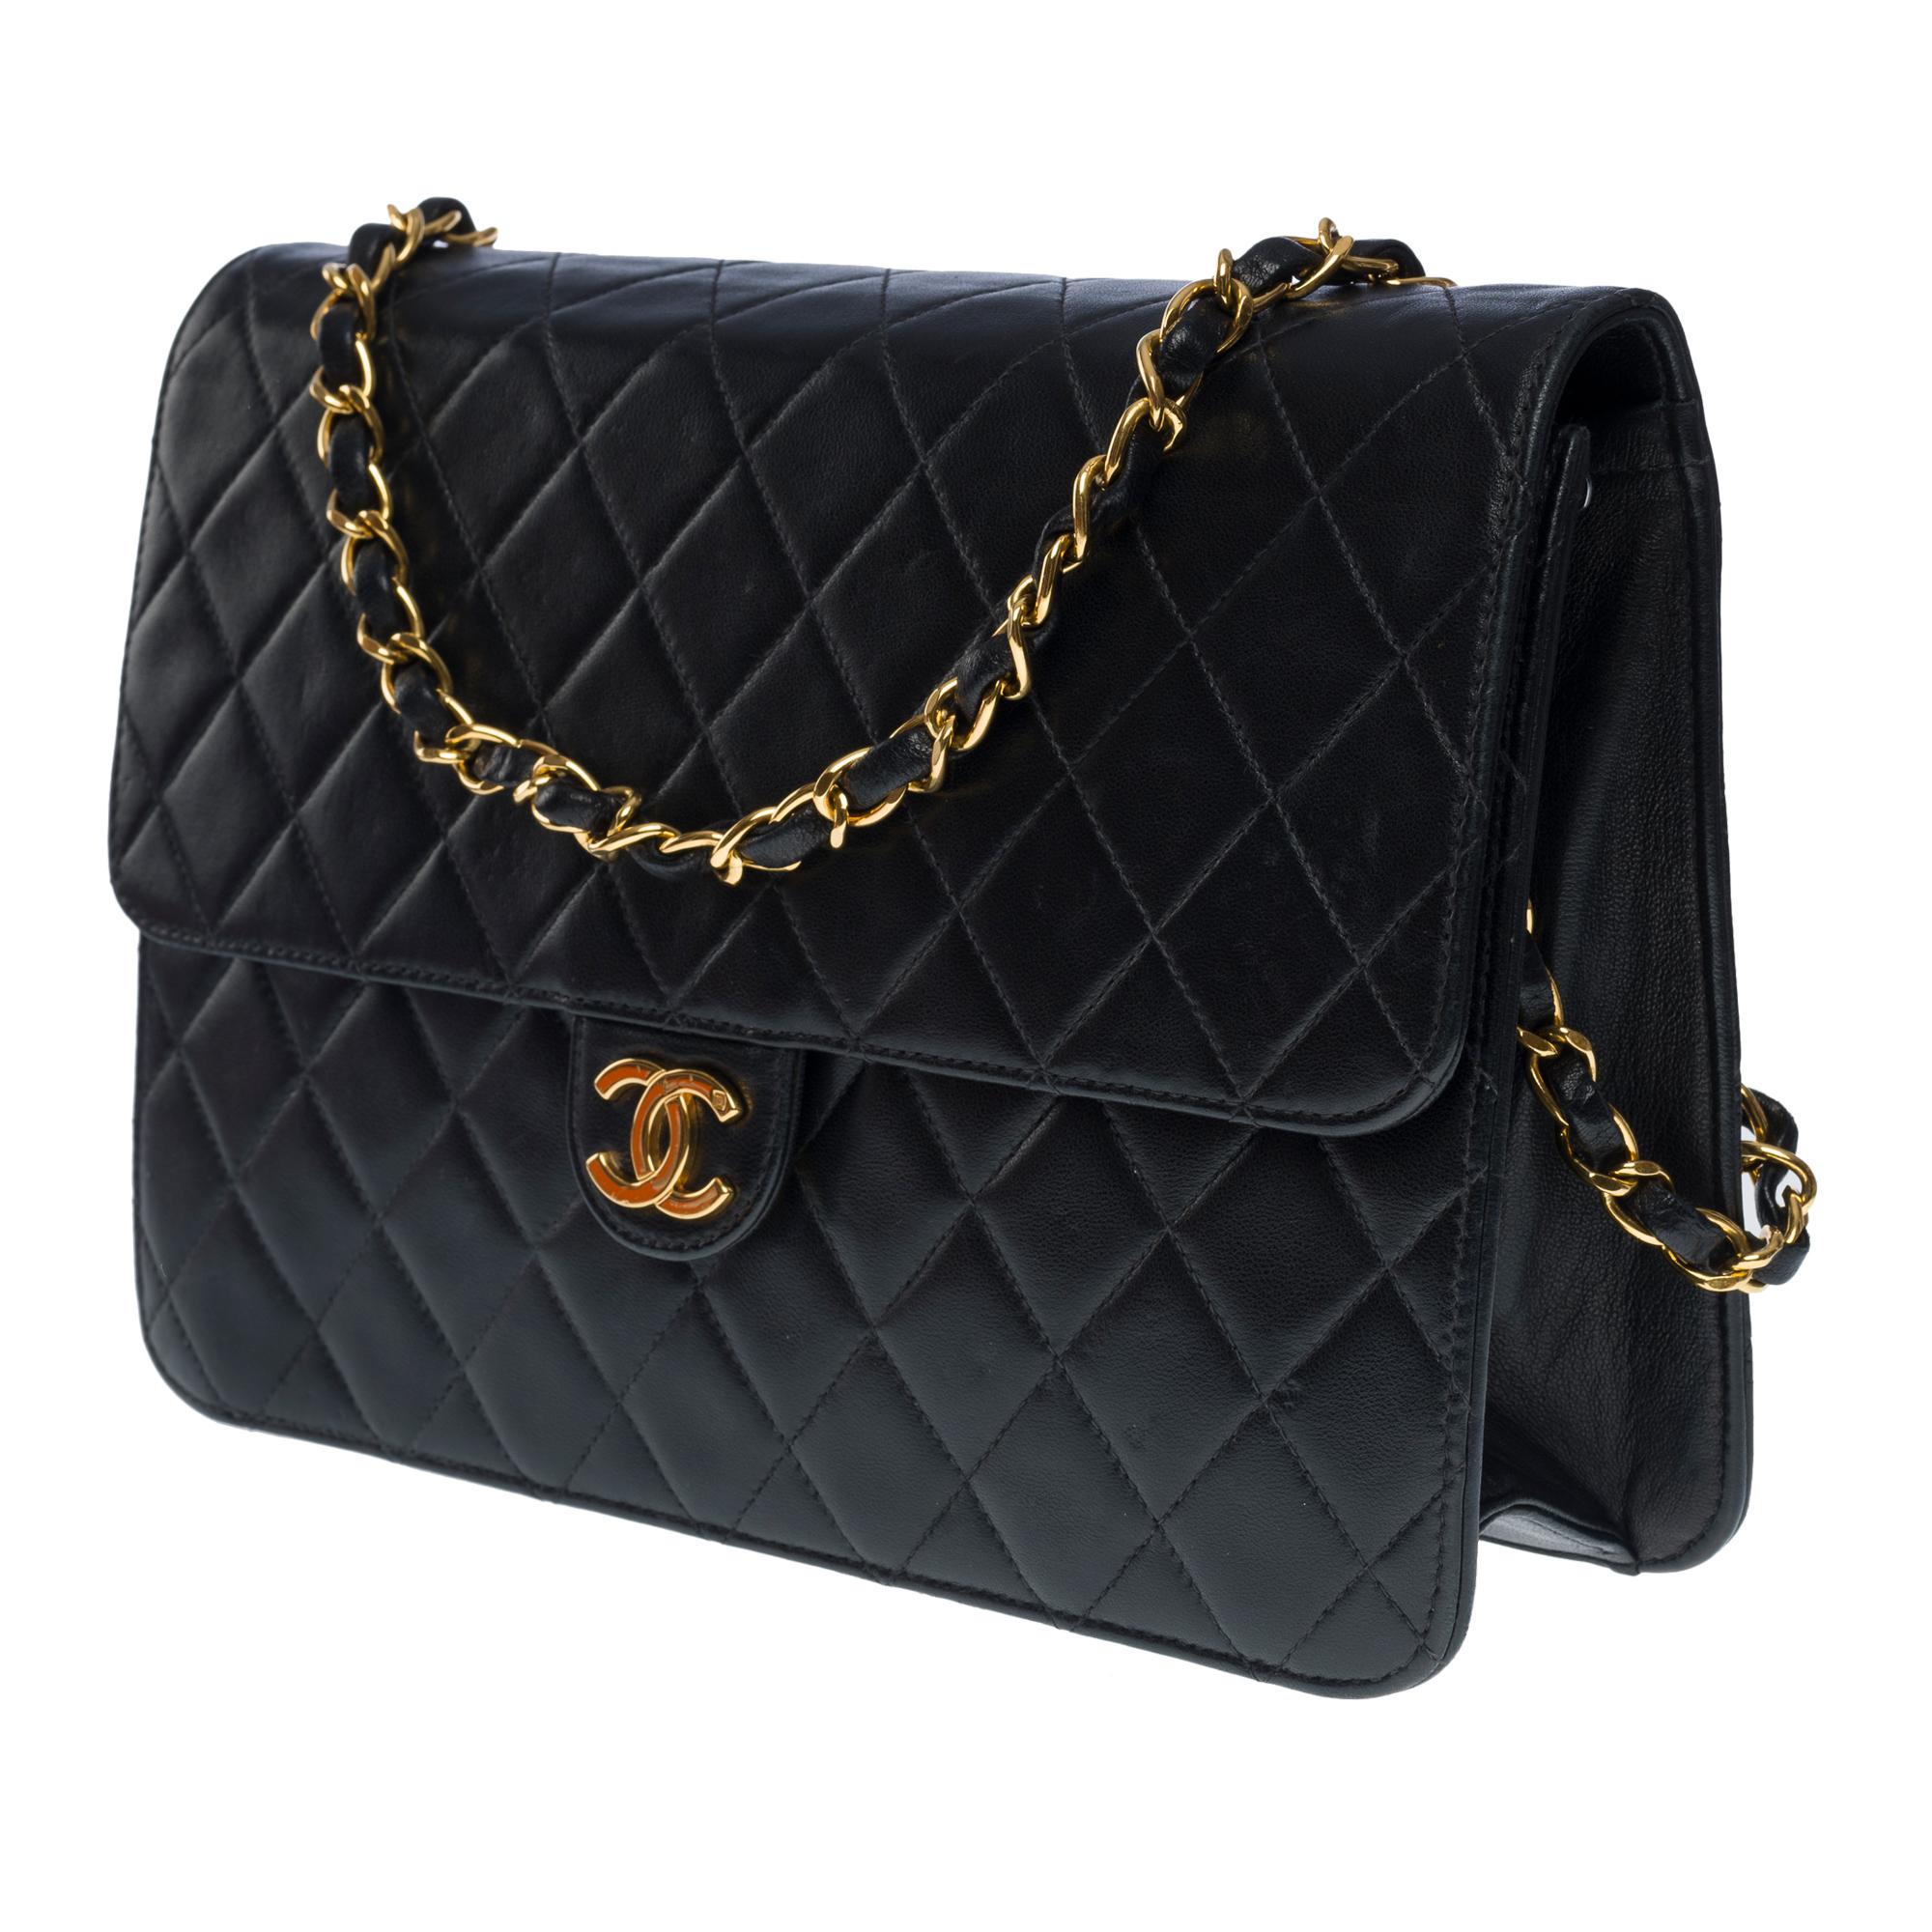 Women's Gorgeous Chanel Classic shoulder flap bag in black quilted lambskin leather, GHW